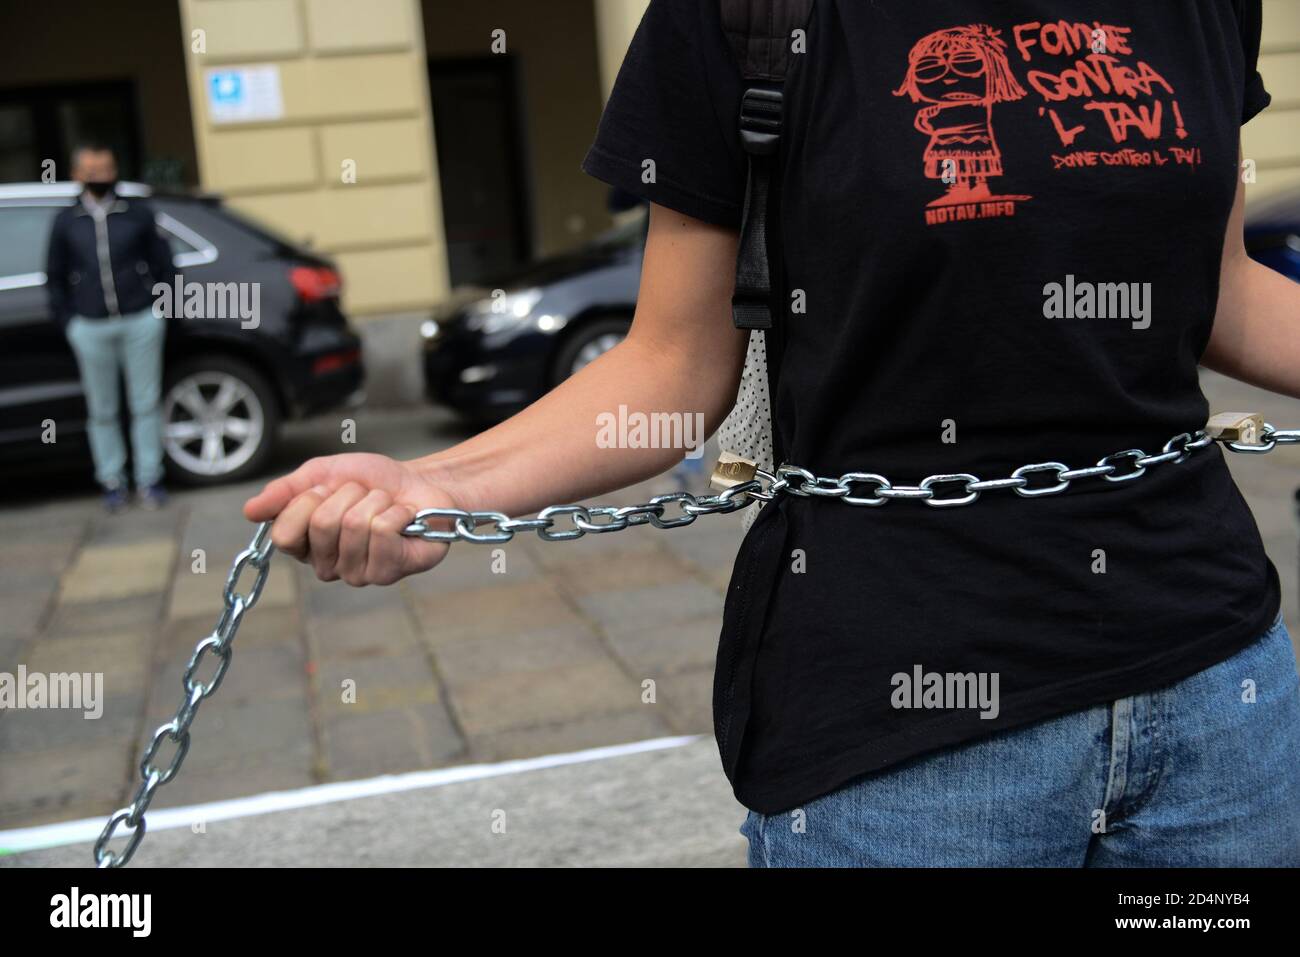 Protesters chained together during a protest as part of the Fridays for Future movement to call for action against climate change on October 09, 2020 Stock Photo